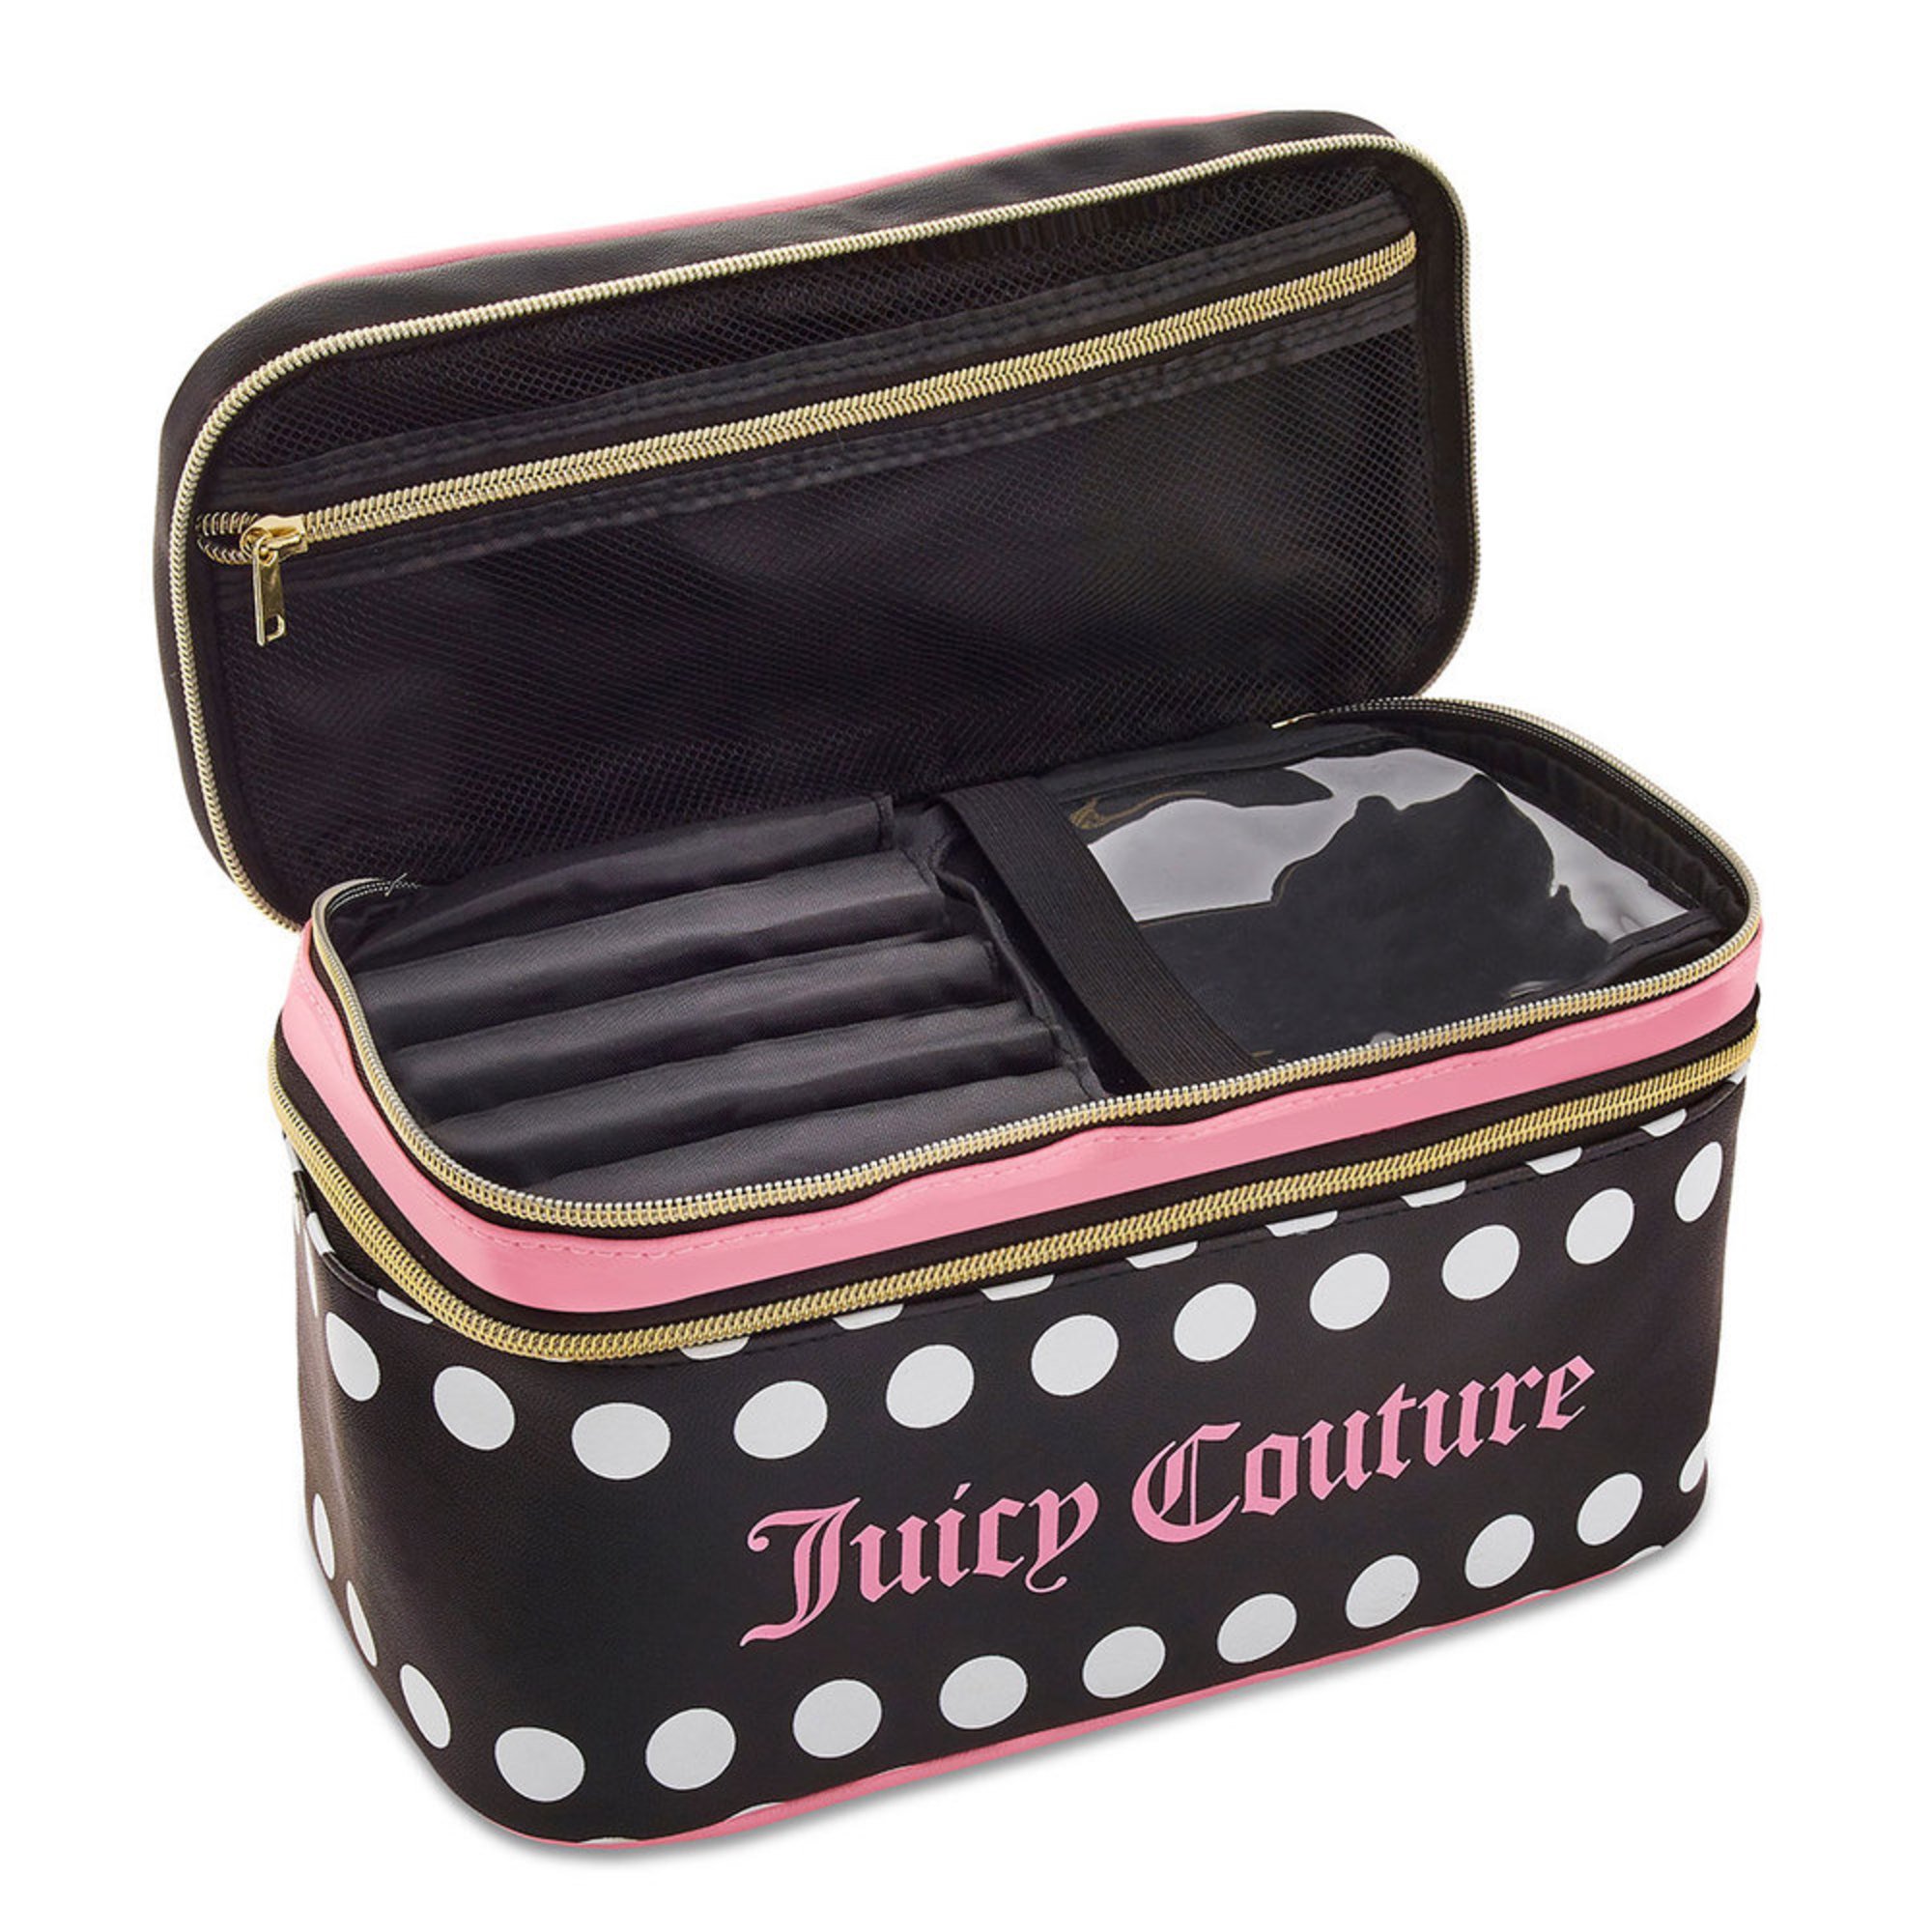 Juicy Couture Double Zip Train Case With Brush Organizer | Makeup ...